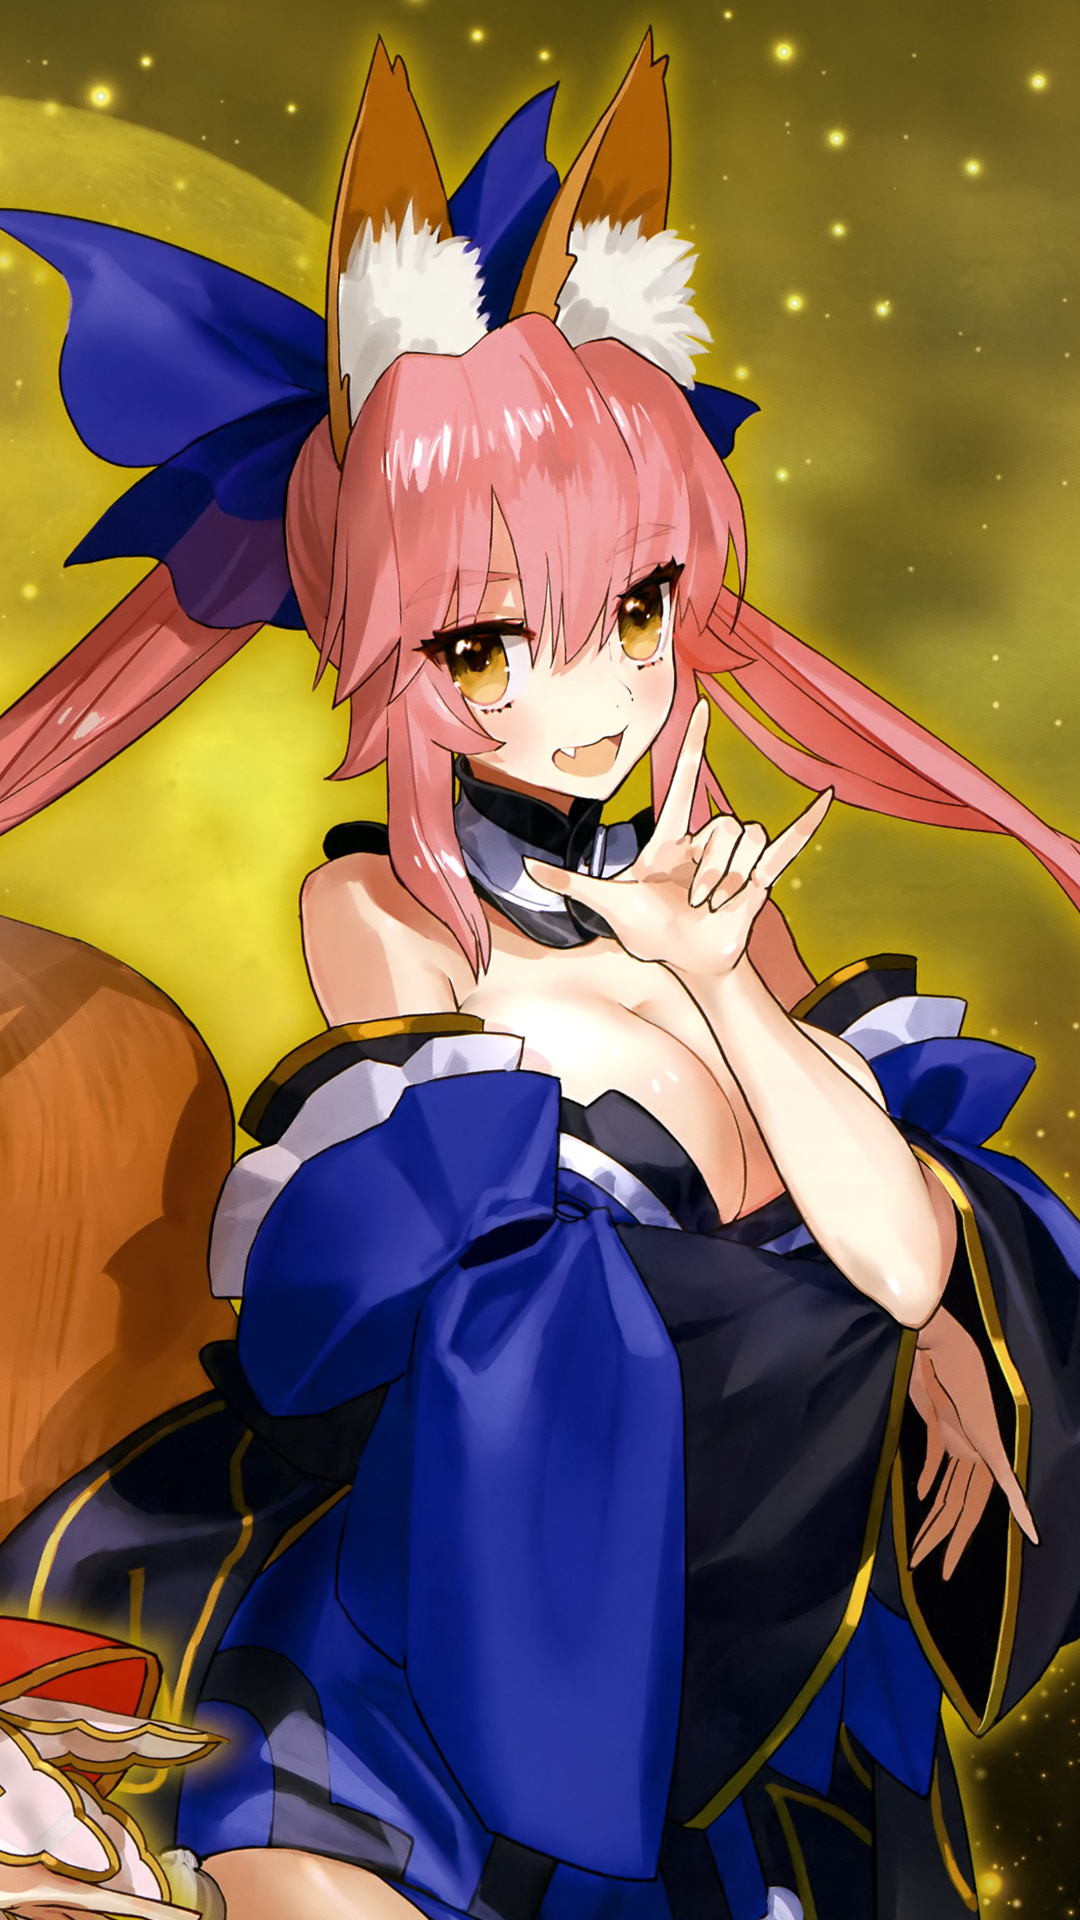 Fate Stay Night Fate Extra Fate Extella キャスター Fate Extra ワダアルコ Iphone7 Plus 1080 19 壁紙 Wallpaperboys Com